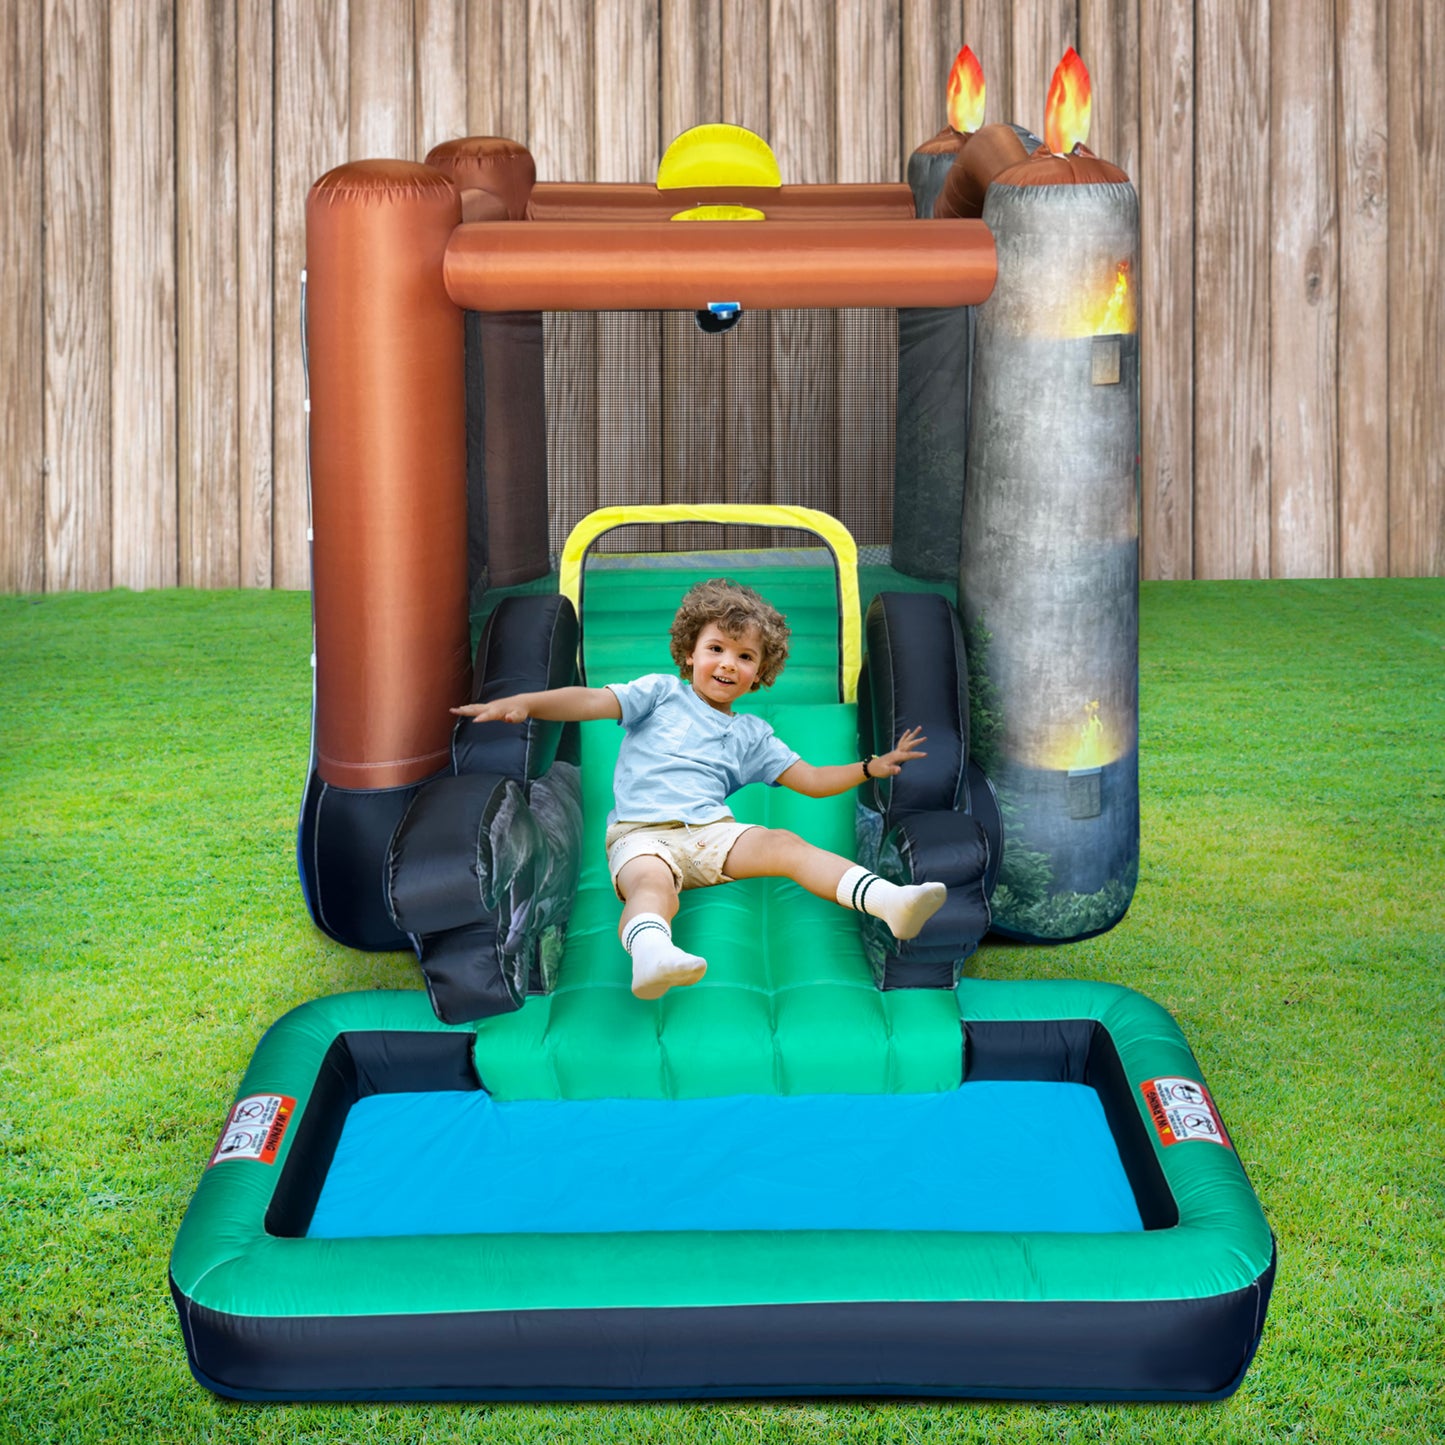 Jurassic World Bounce House Water Slide with Pool